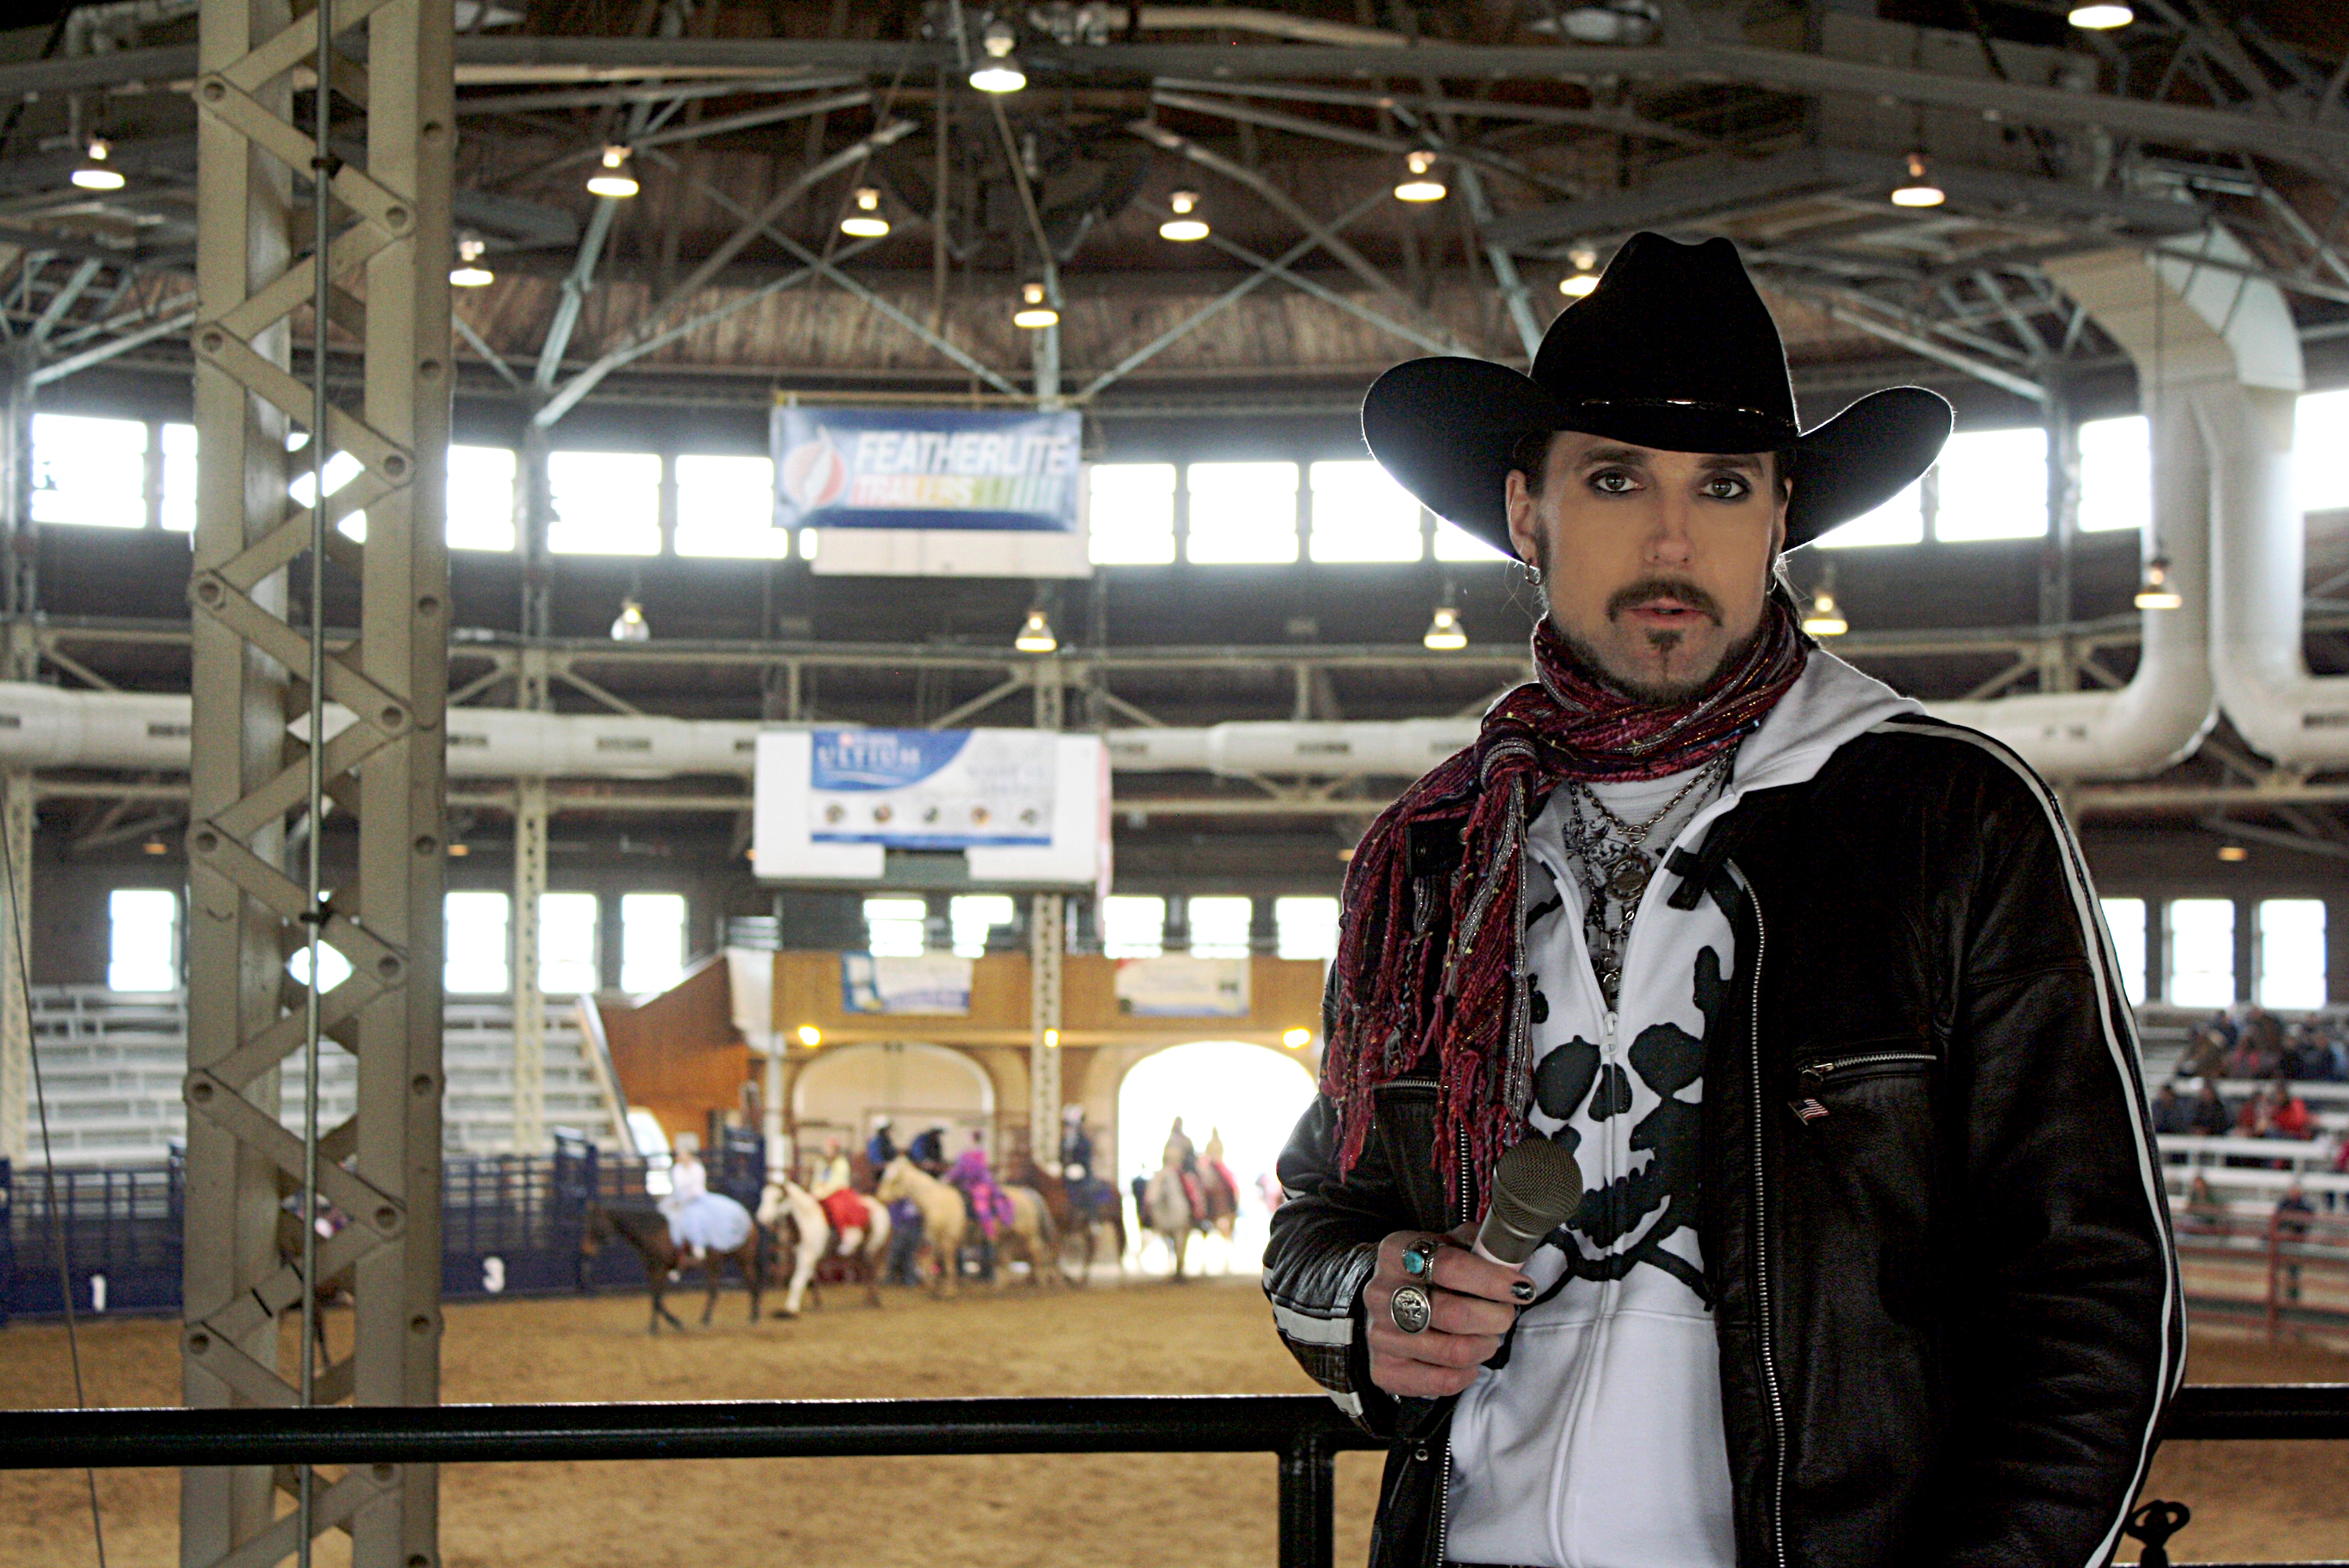 MATT WIGGINS prepares to make comments during an appearance at the annual Horse Fair in Des Moines, IA in April 2014